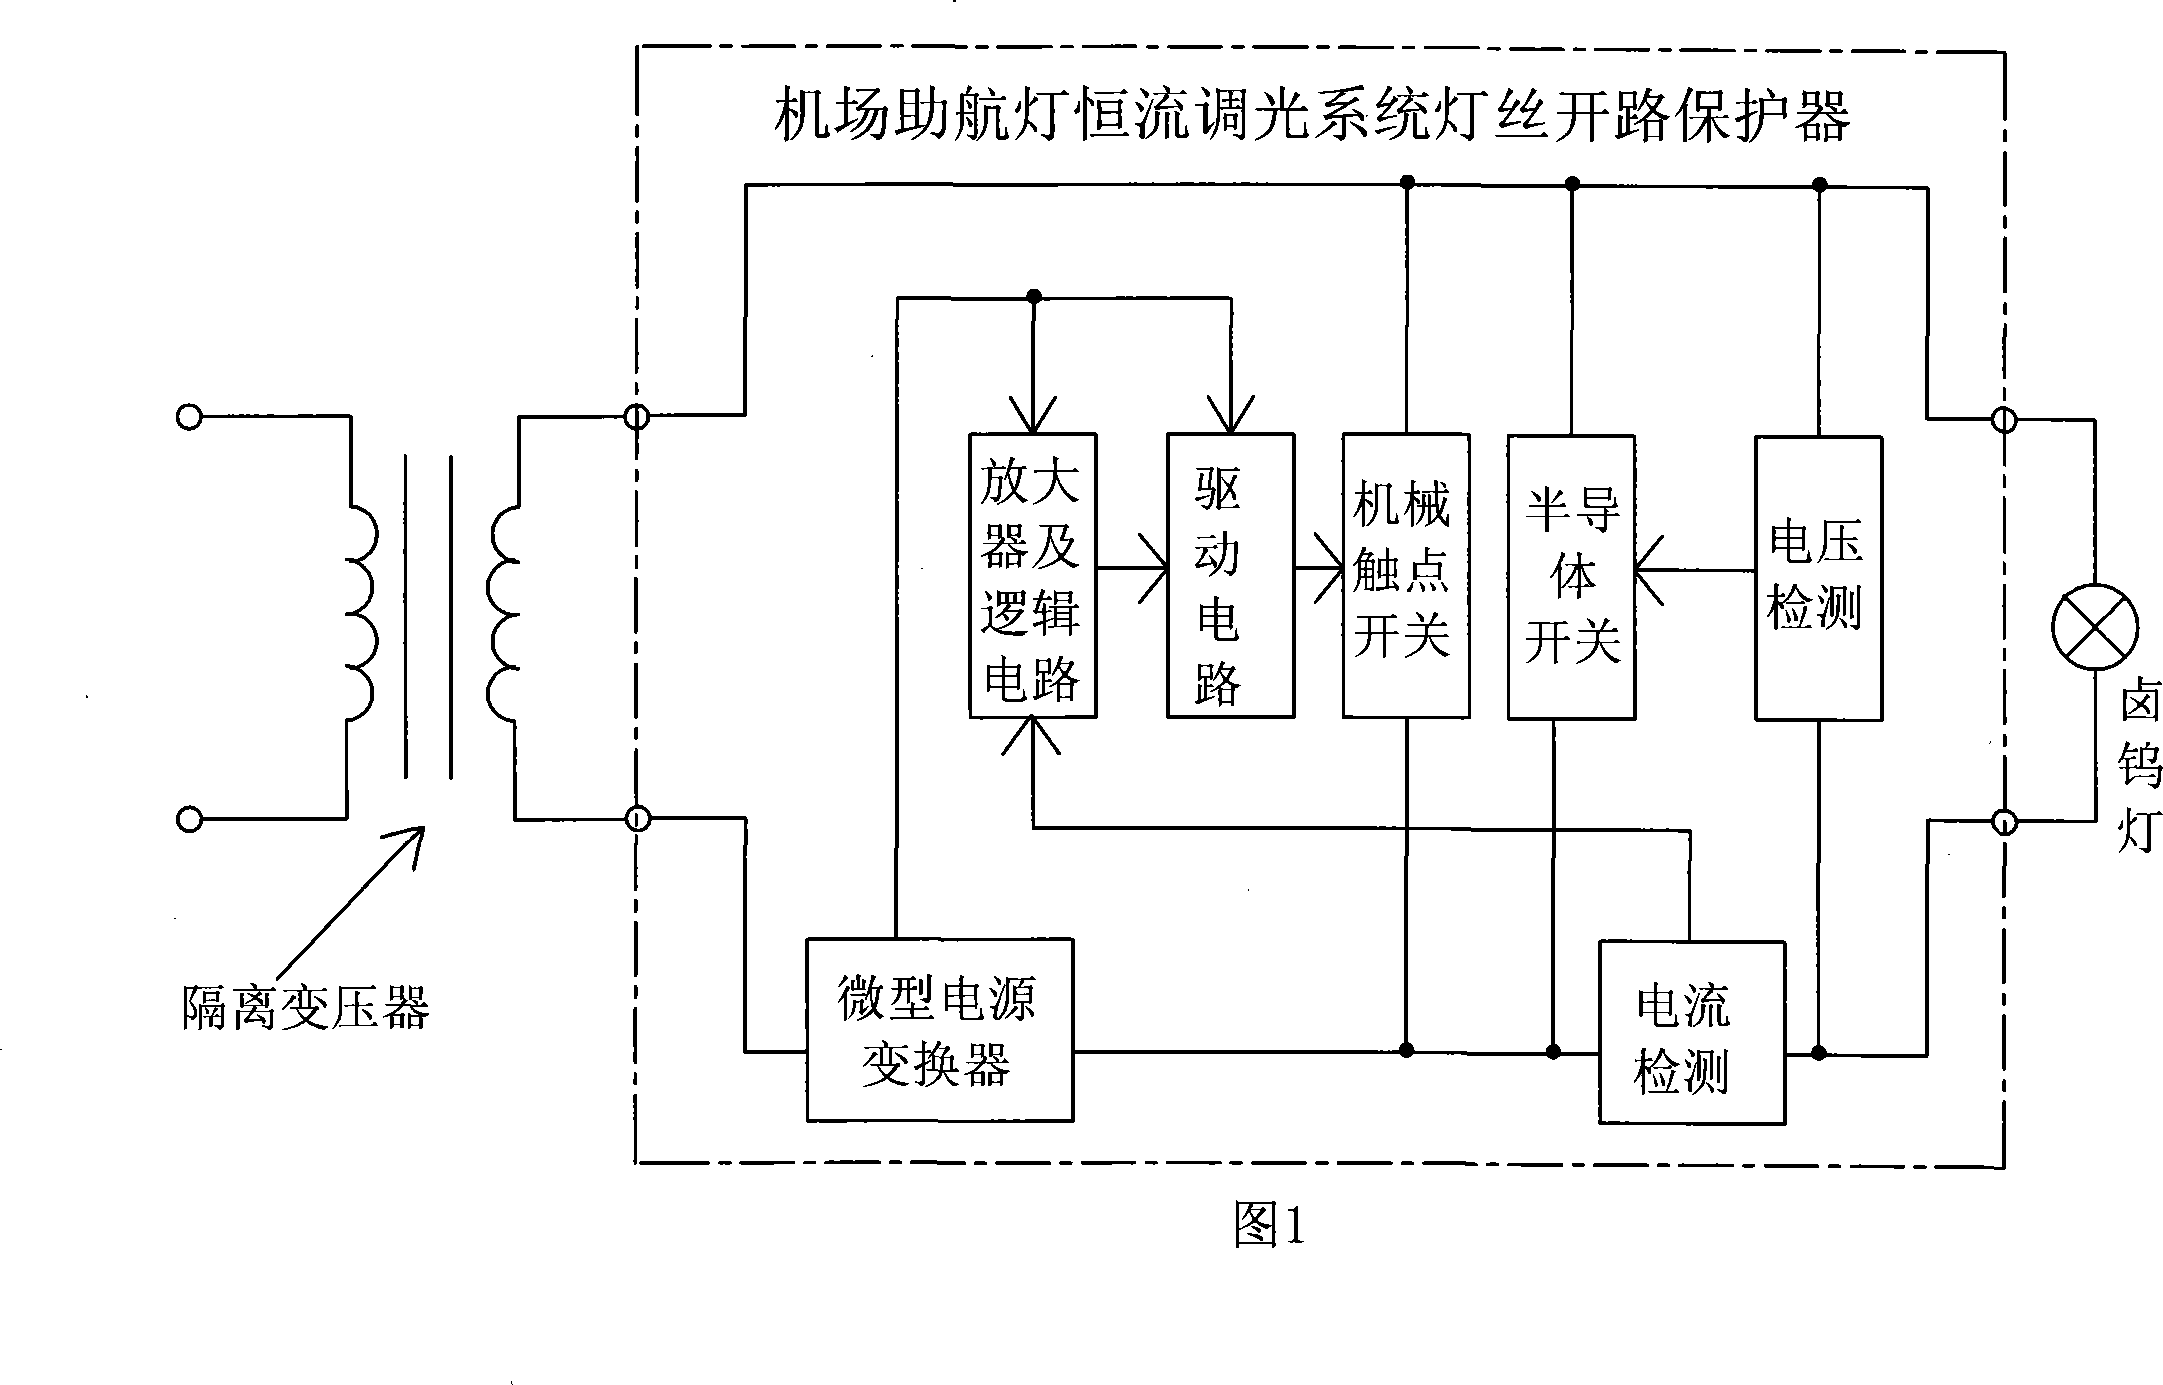 Filament open-circuit protector for constant-current light modulation system of air station navigation light